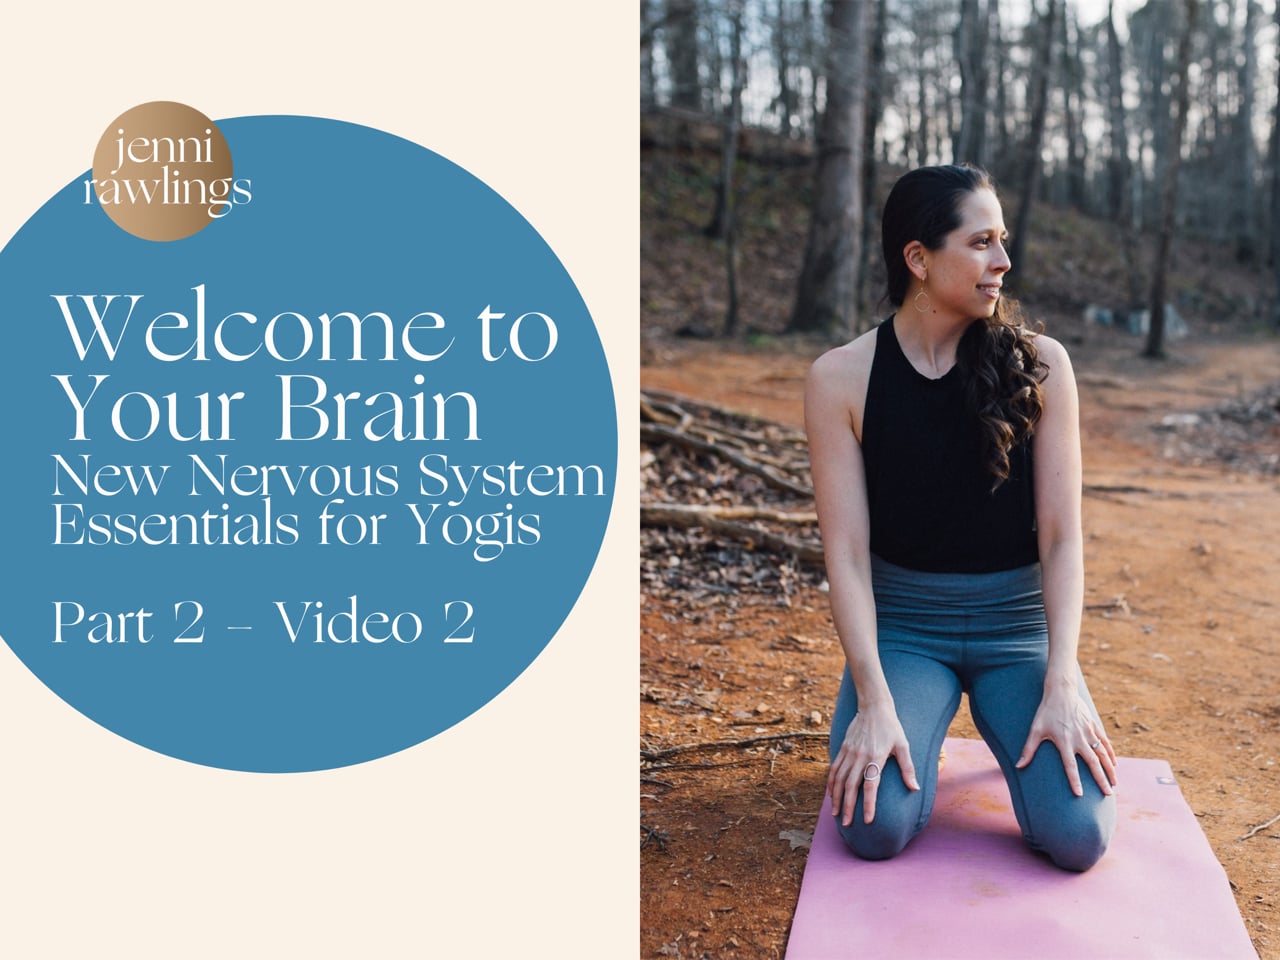 Part 2 Video 2 – Welcome to Your Brain